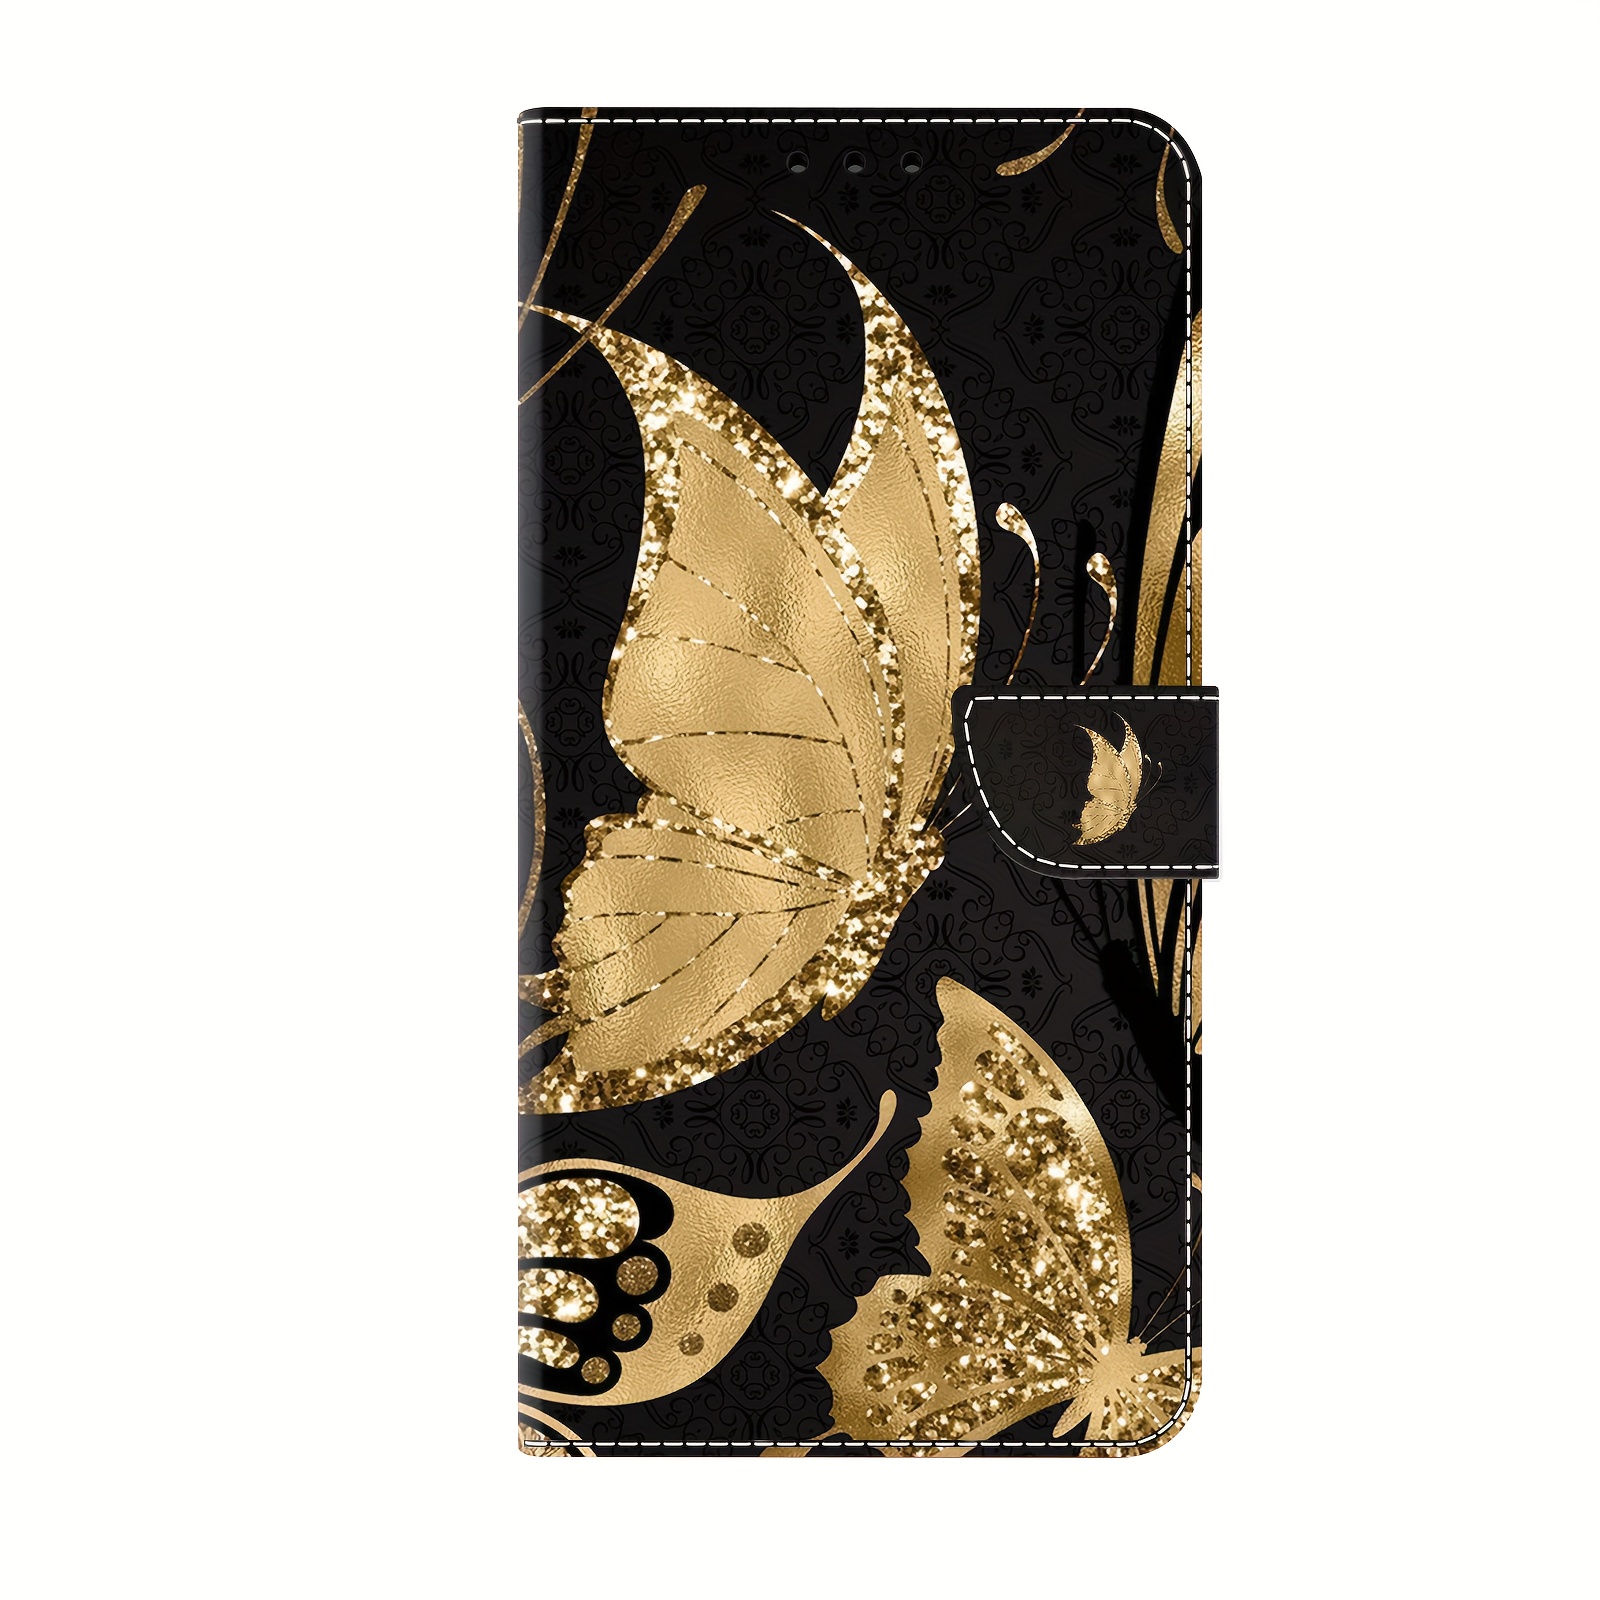 for iphone 6 6s 7 8 se2 3 x xs xr 11 12 13 14 15 mini plus pro max pu faux leather with card slot foldable stand flip wallet case for iphone black golden iphone 6 plus 6s plus 0